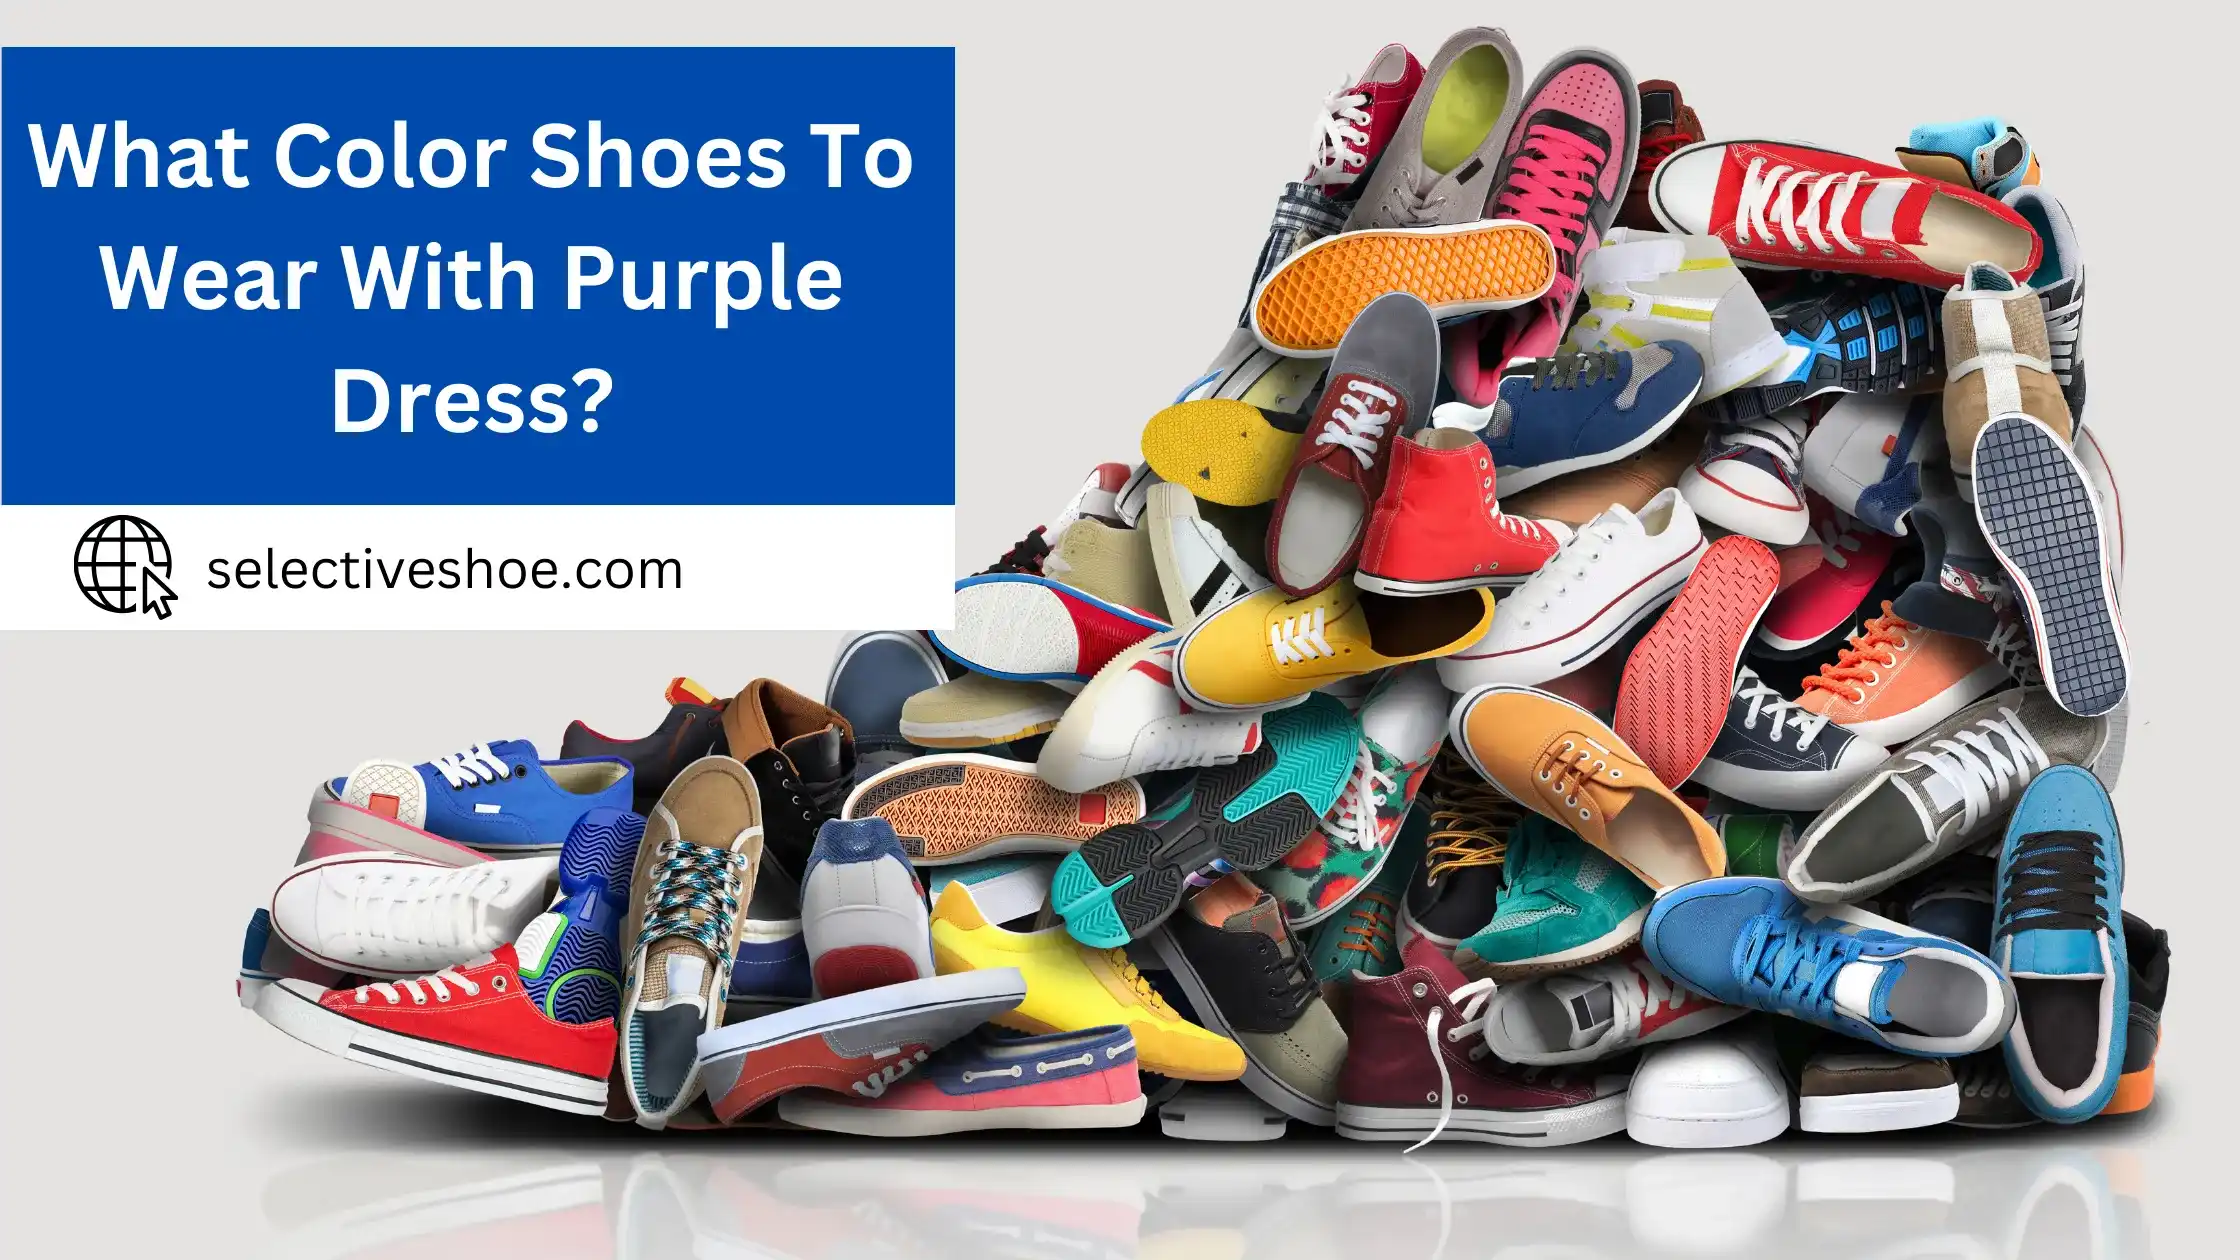 What Color Shoes To Wear With Purple Dress? Detailed Analysis